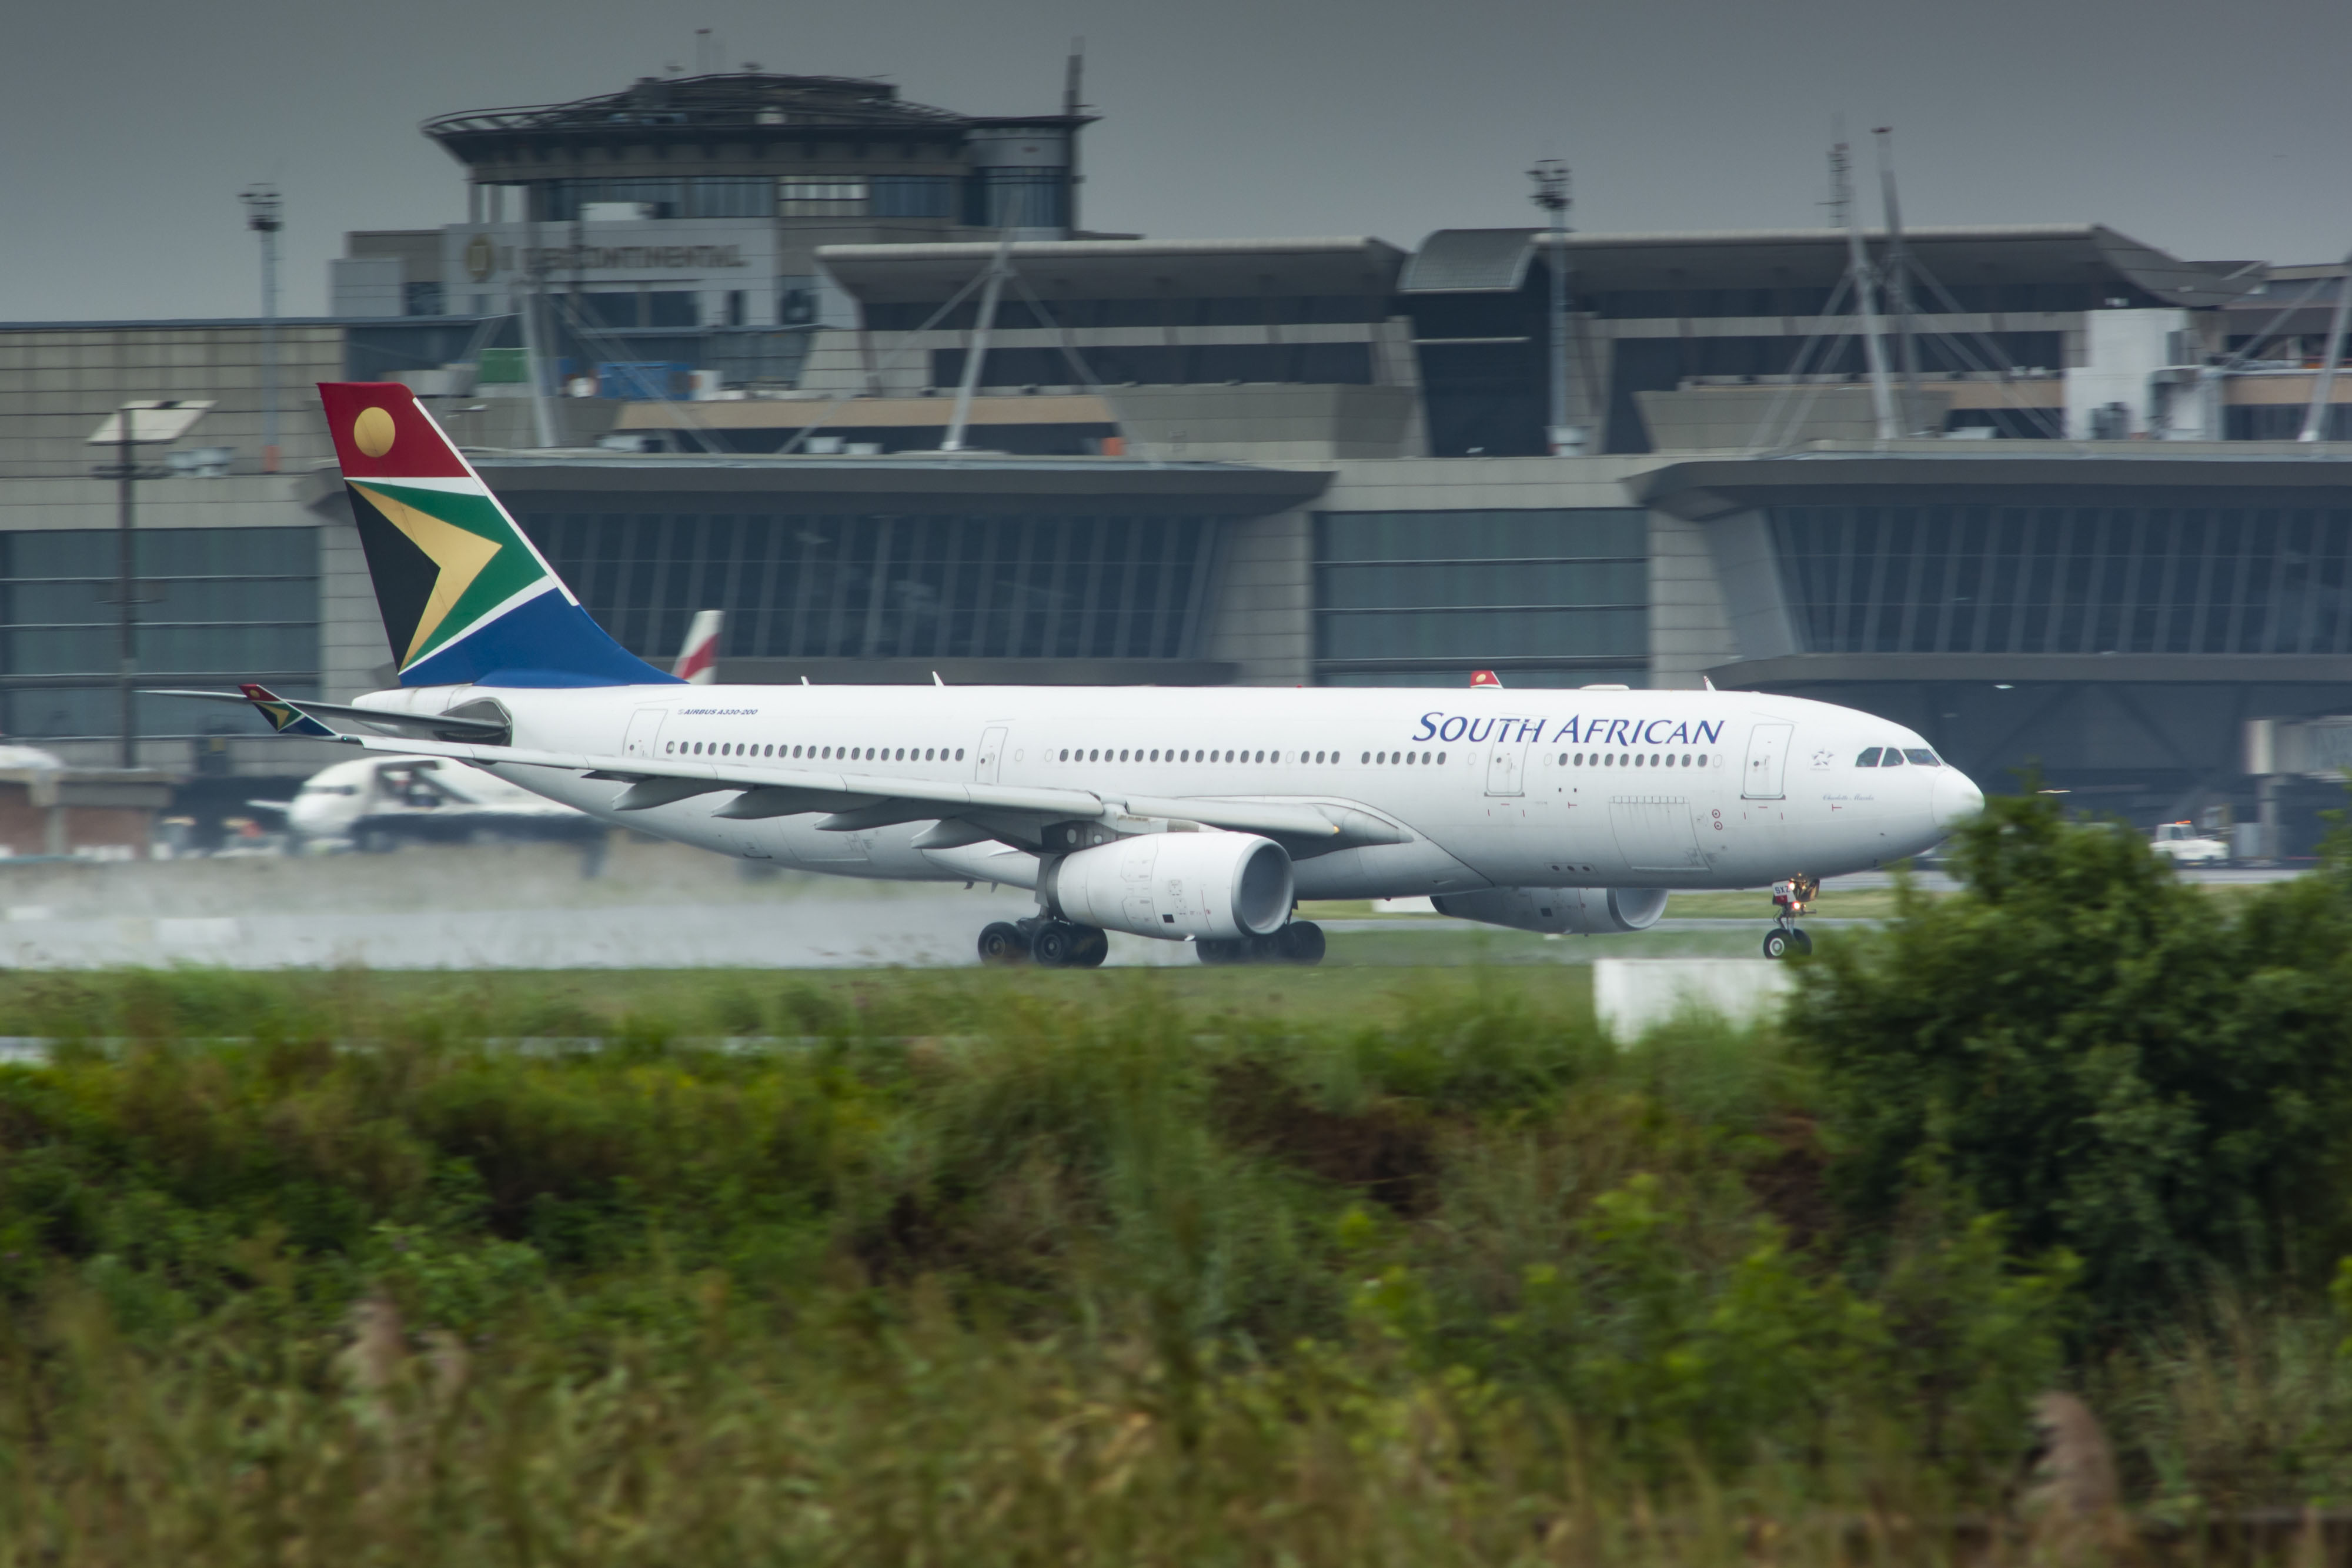 South African Airlines airways aircraft at O.R. Tambo International Airport in Johannesburg.